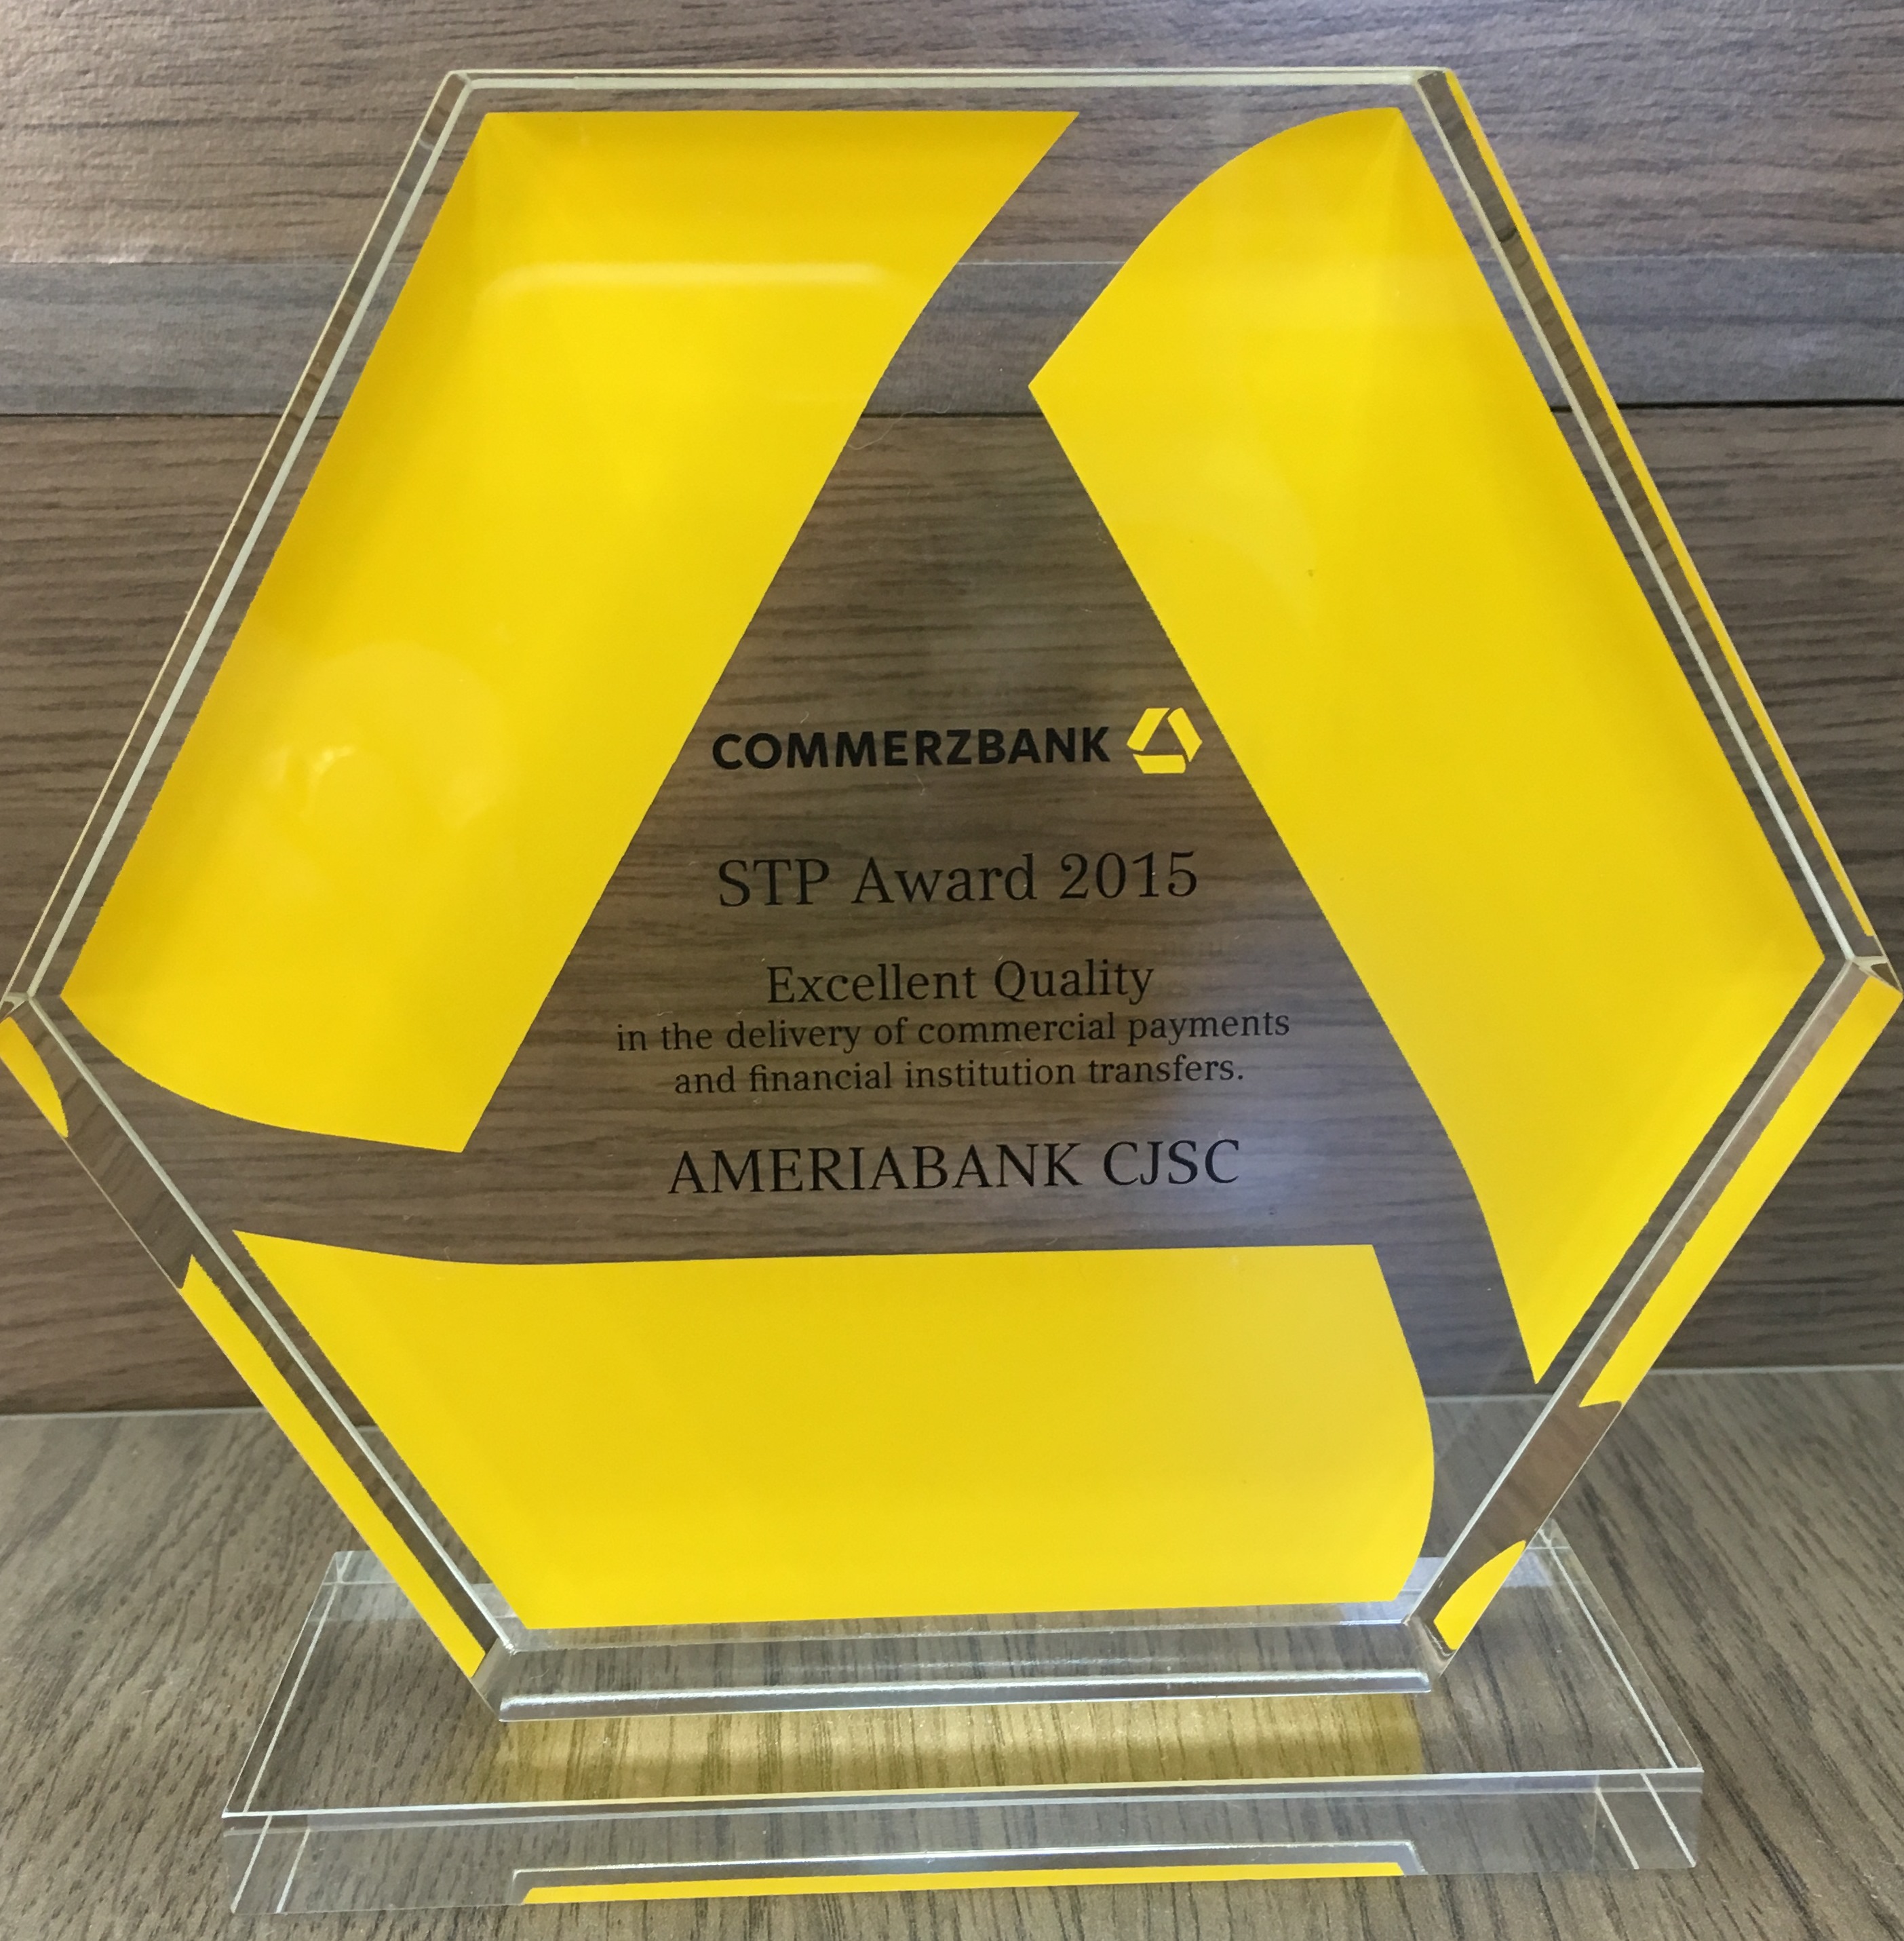 Ameriabank once again receives Commerzbank`s Quality Excellence Award